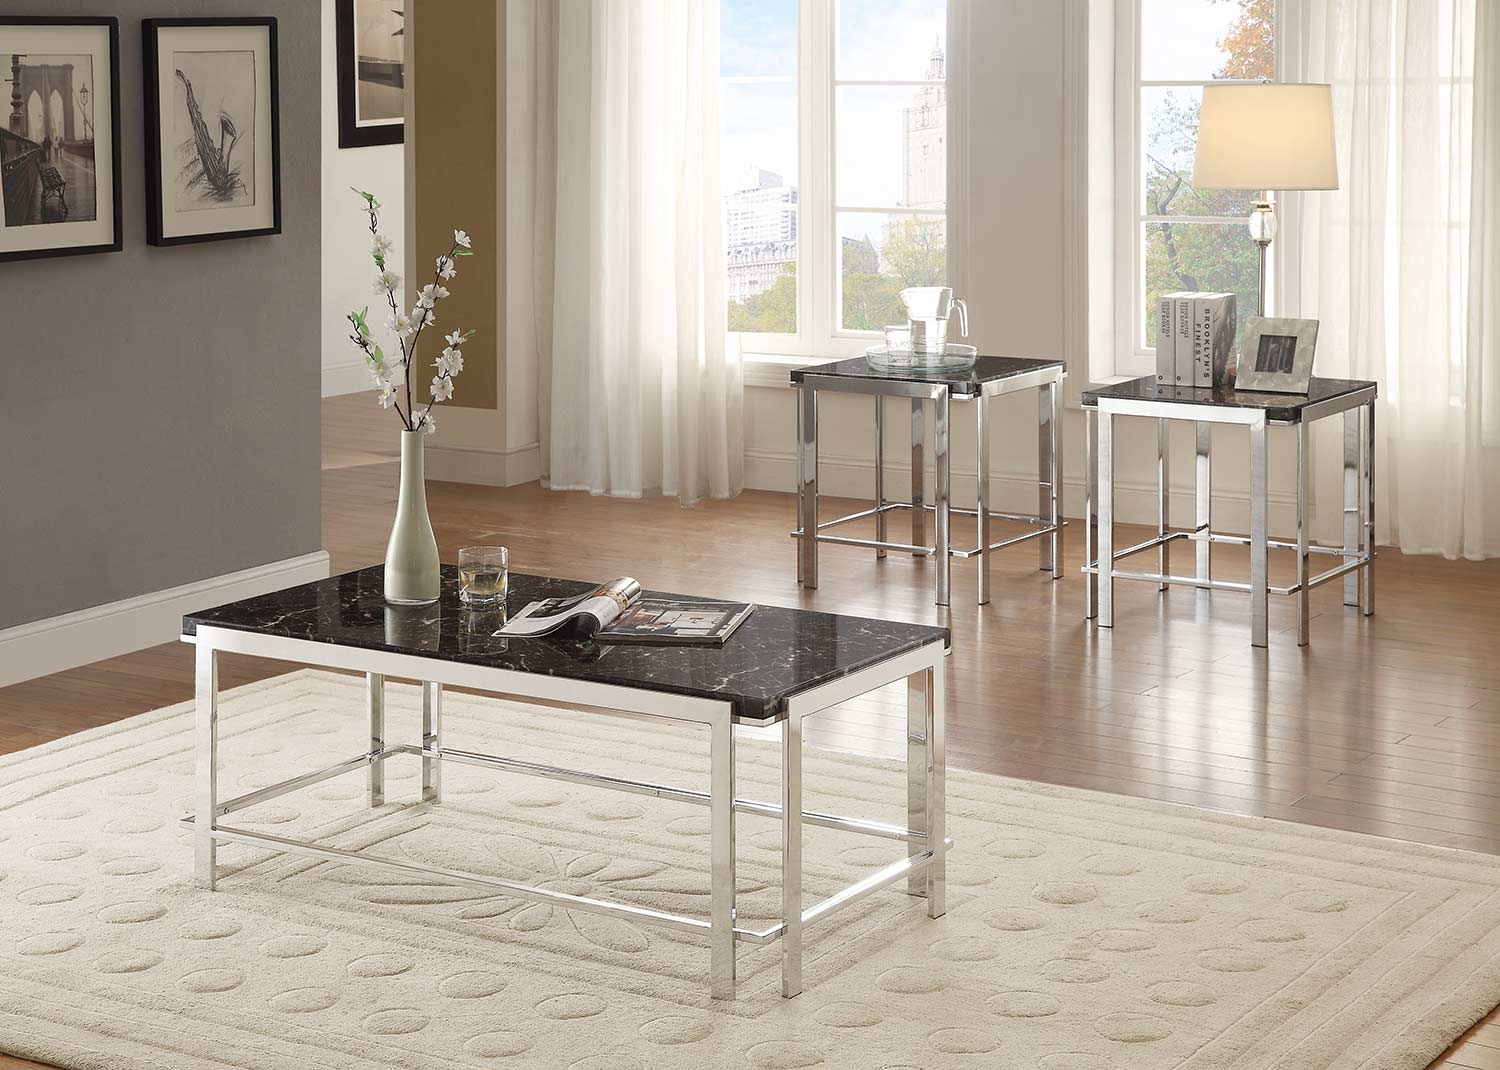 Homelegance Watt 3-Piece Occasional Table Set with Shelf - Chrome Metal Base with Faux Marble Top